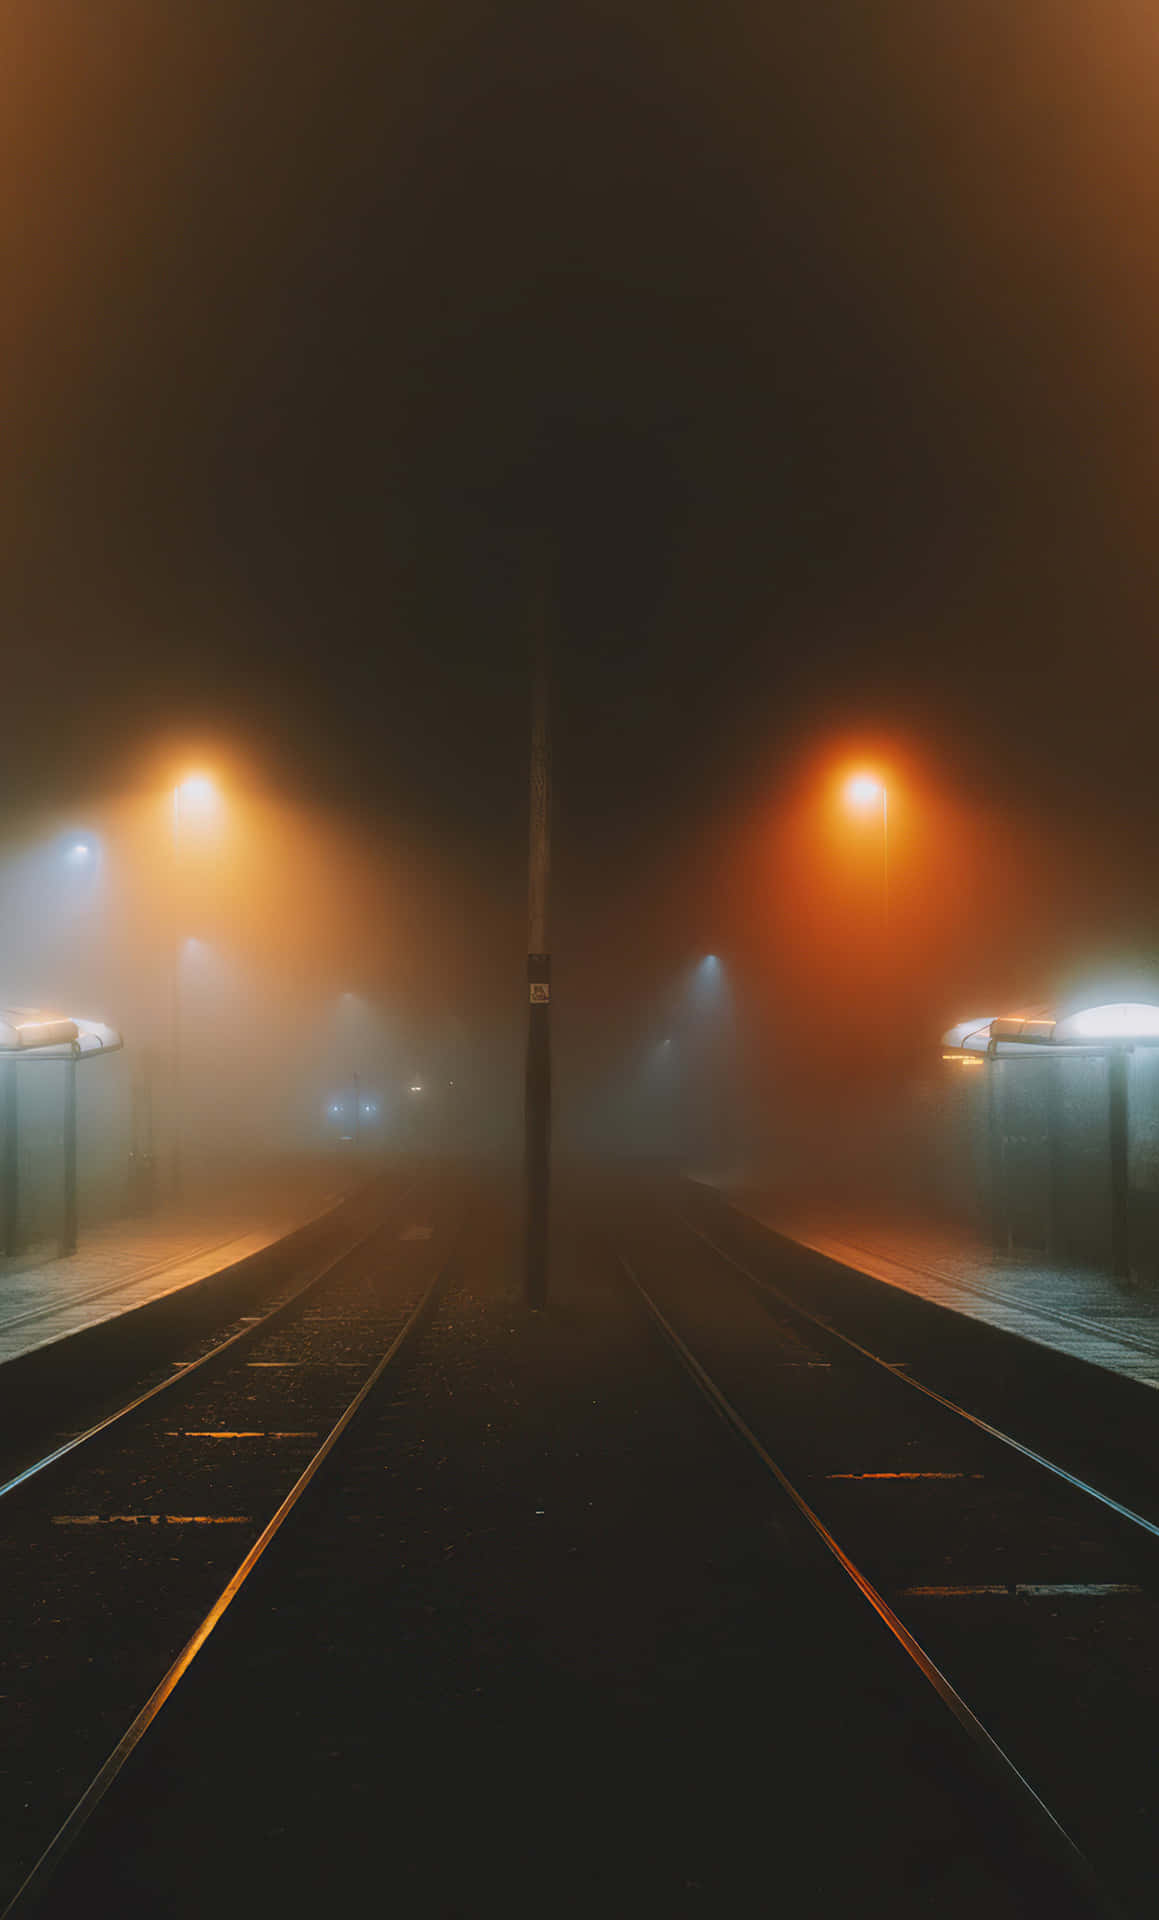 Let your thoughts wander in the foggy aesthetic Wallpaper